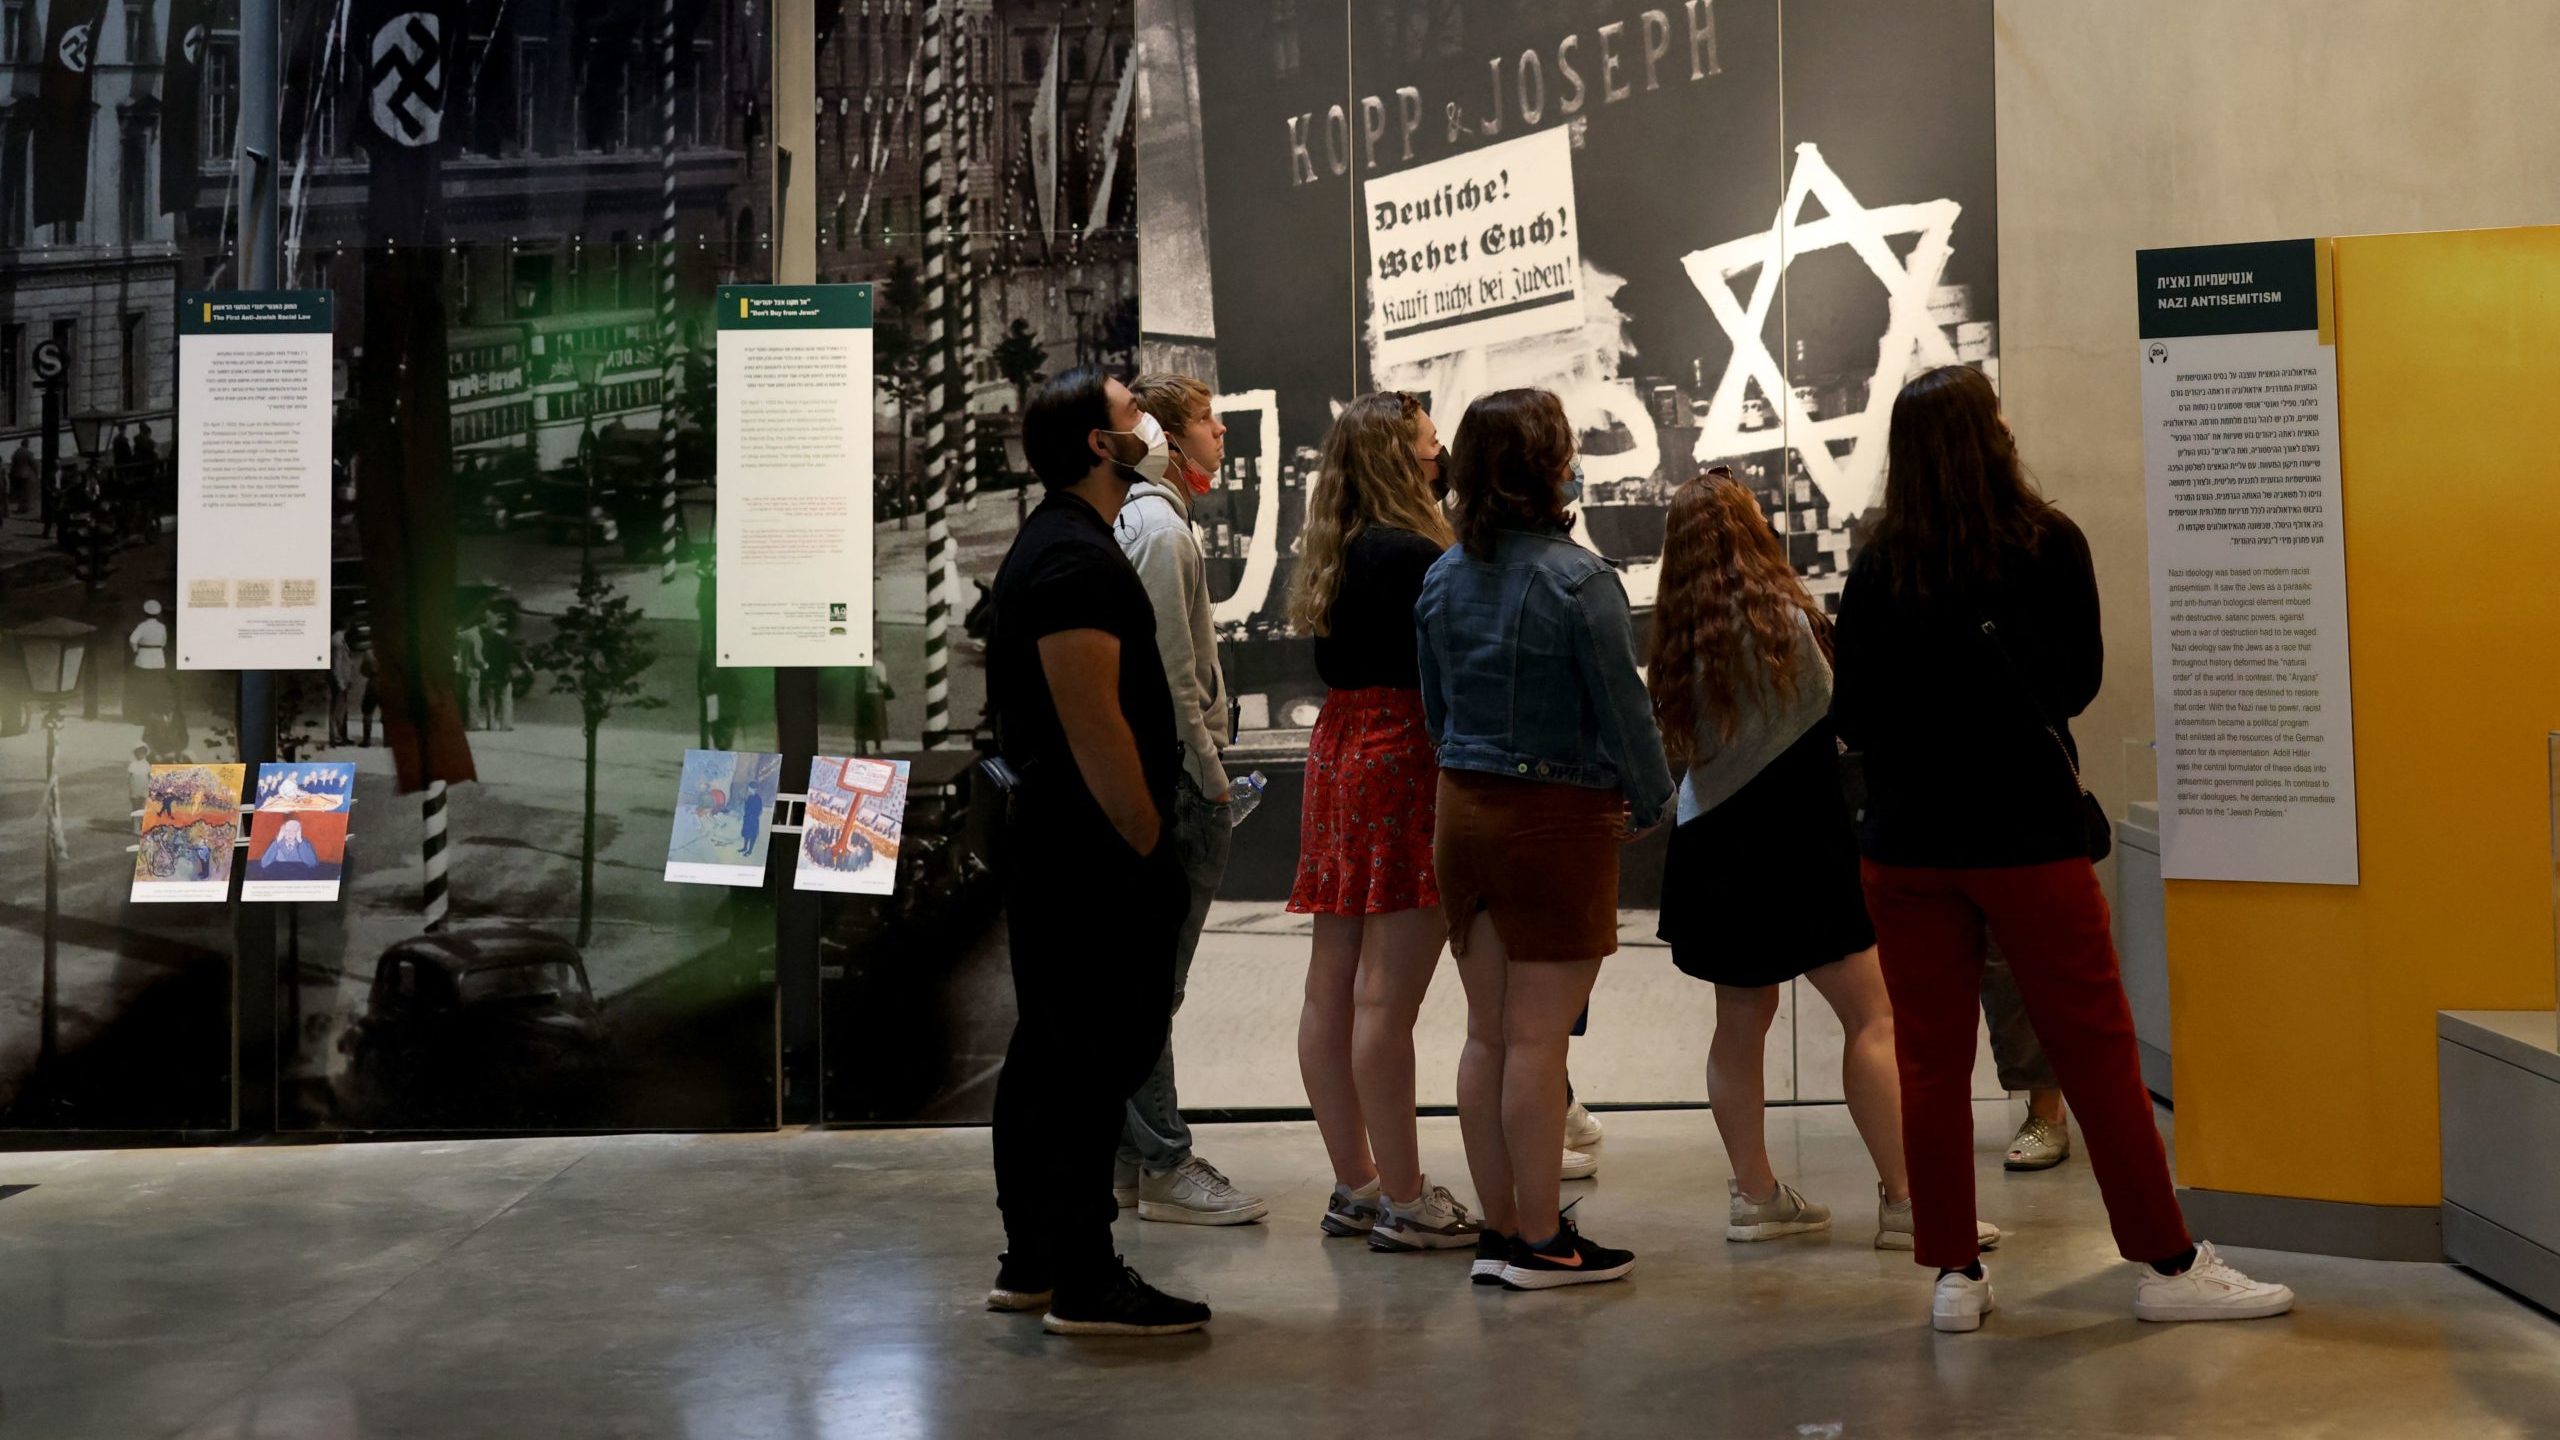 Holocaust Education Is for Everyone, Not Just Jews